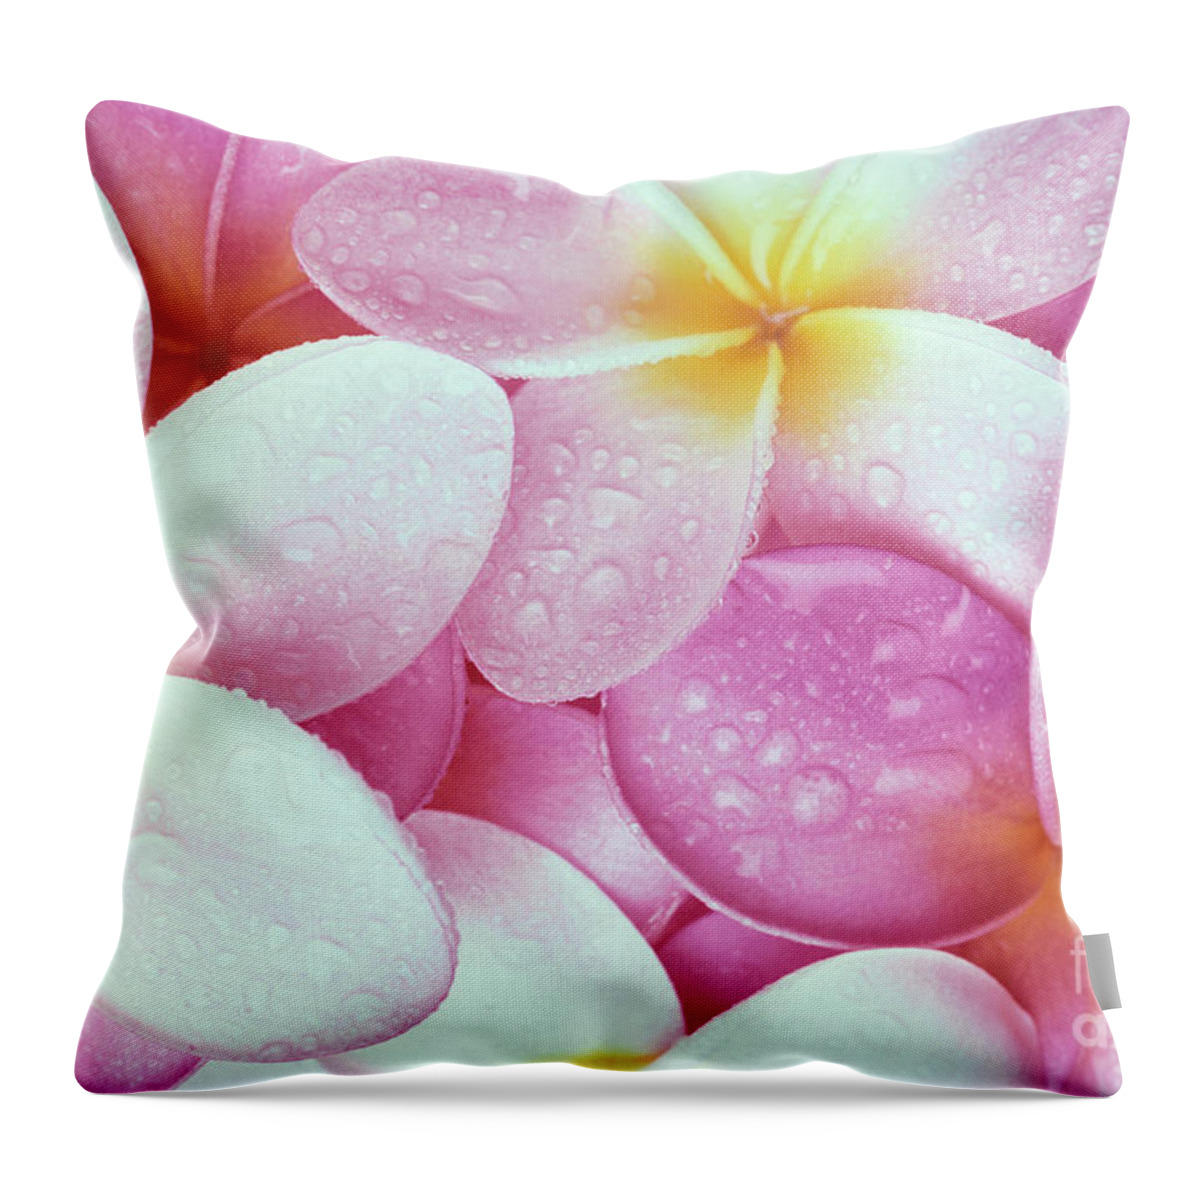 Aloha Throw Pillow featuring the photograph Pink Plumeria by Carl Shaneff - Printscapes